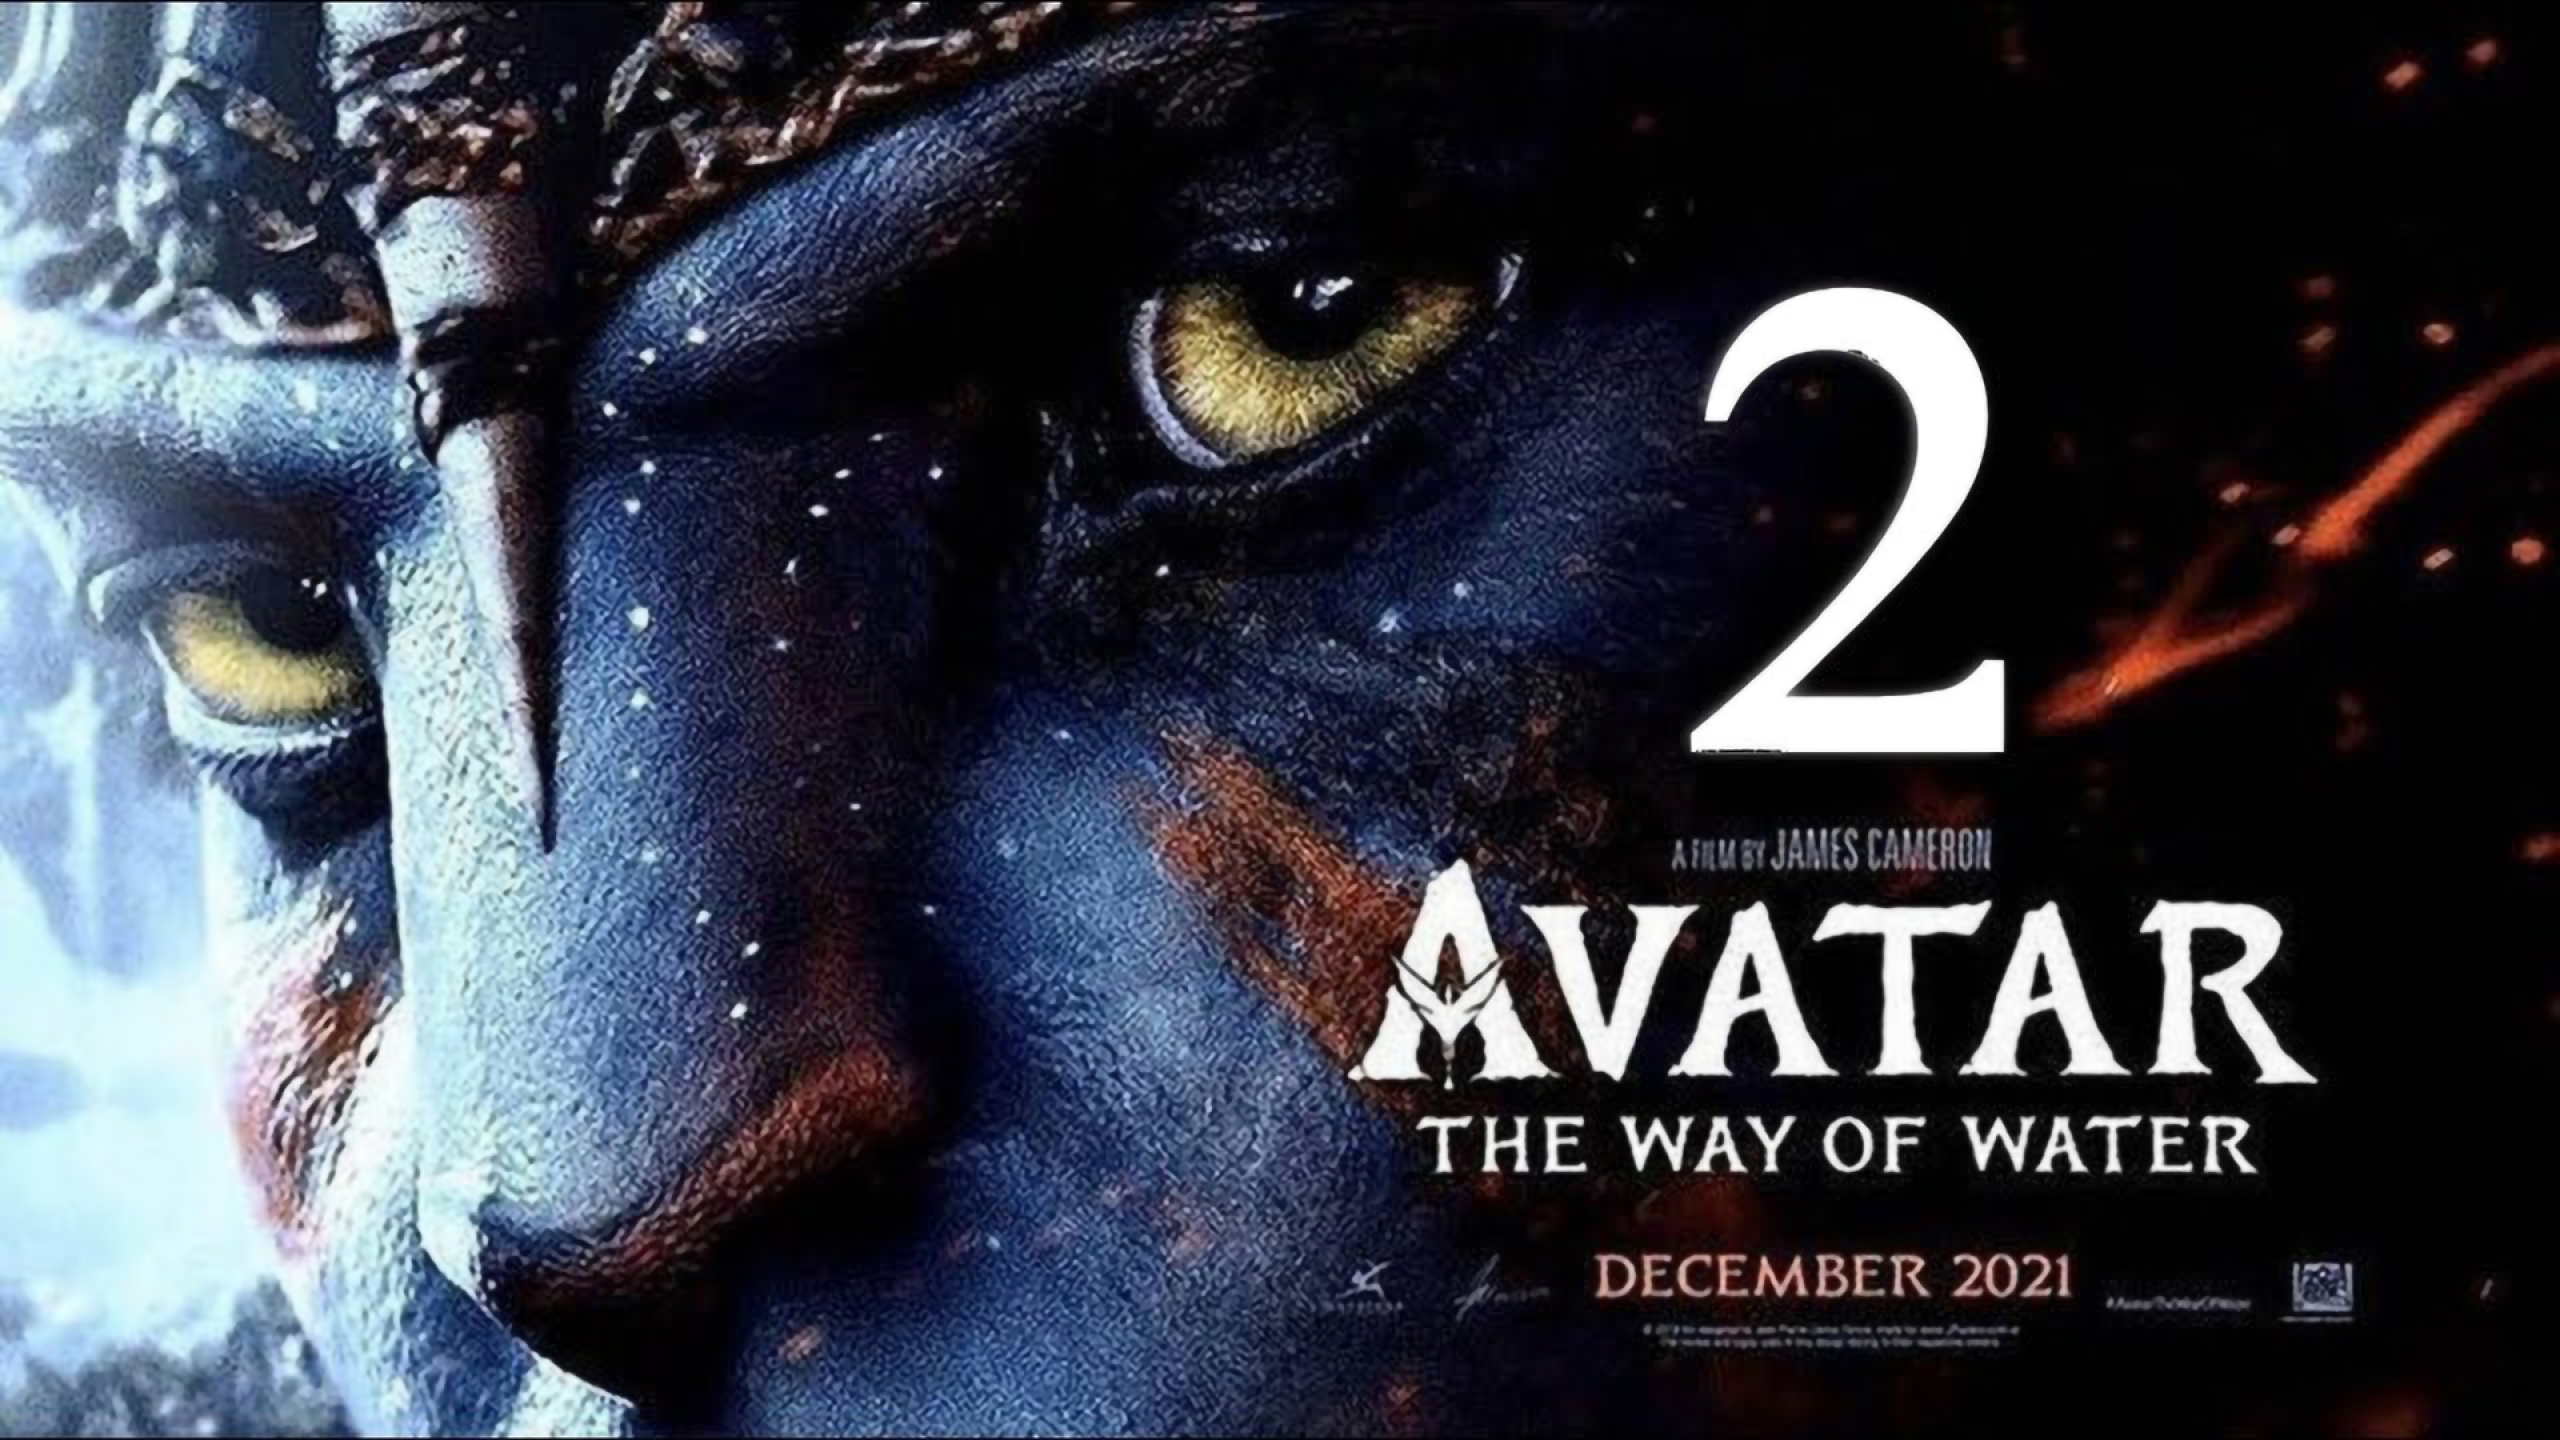 download the new Avatar: The Way of Water